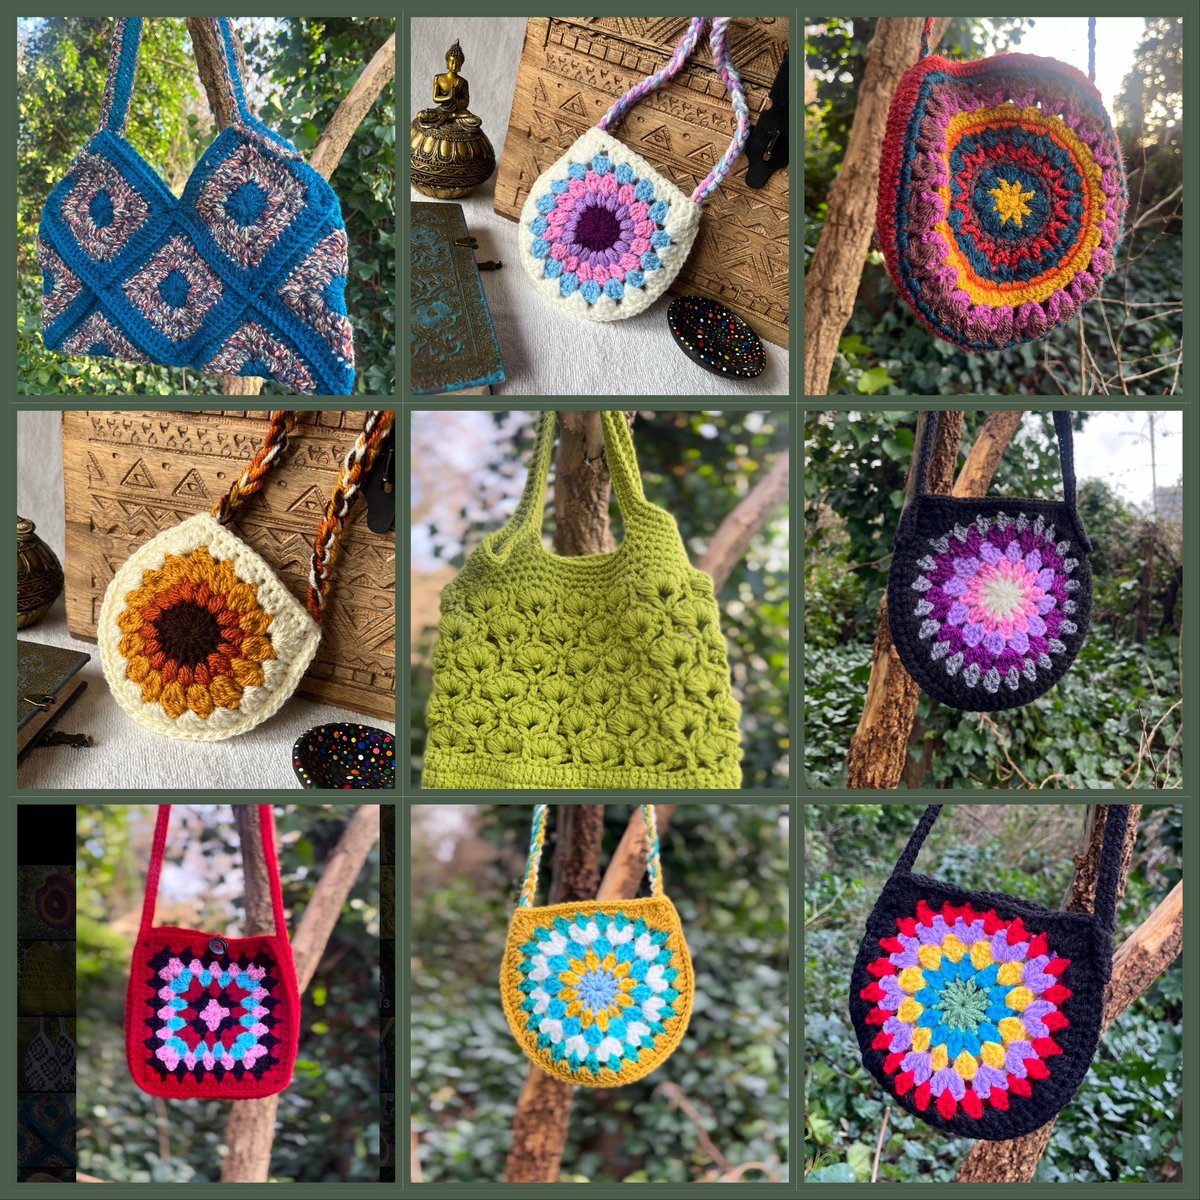 Here are some of my handmade crochet bags I’ve whipped up in the last few months ☺️ I never tire of crocheting unique things ☺️ Link below to browse #MHHSBD #craftbizparty #brumhour #handmadehour